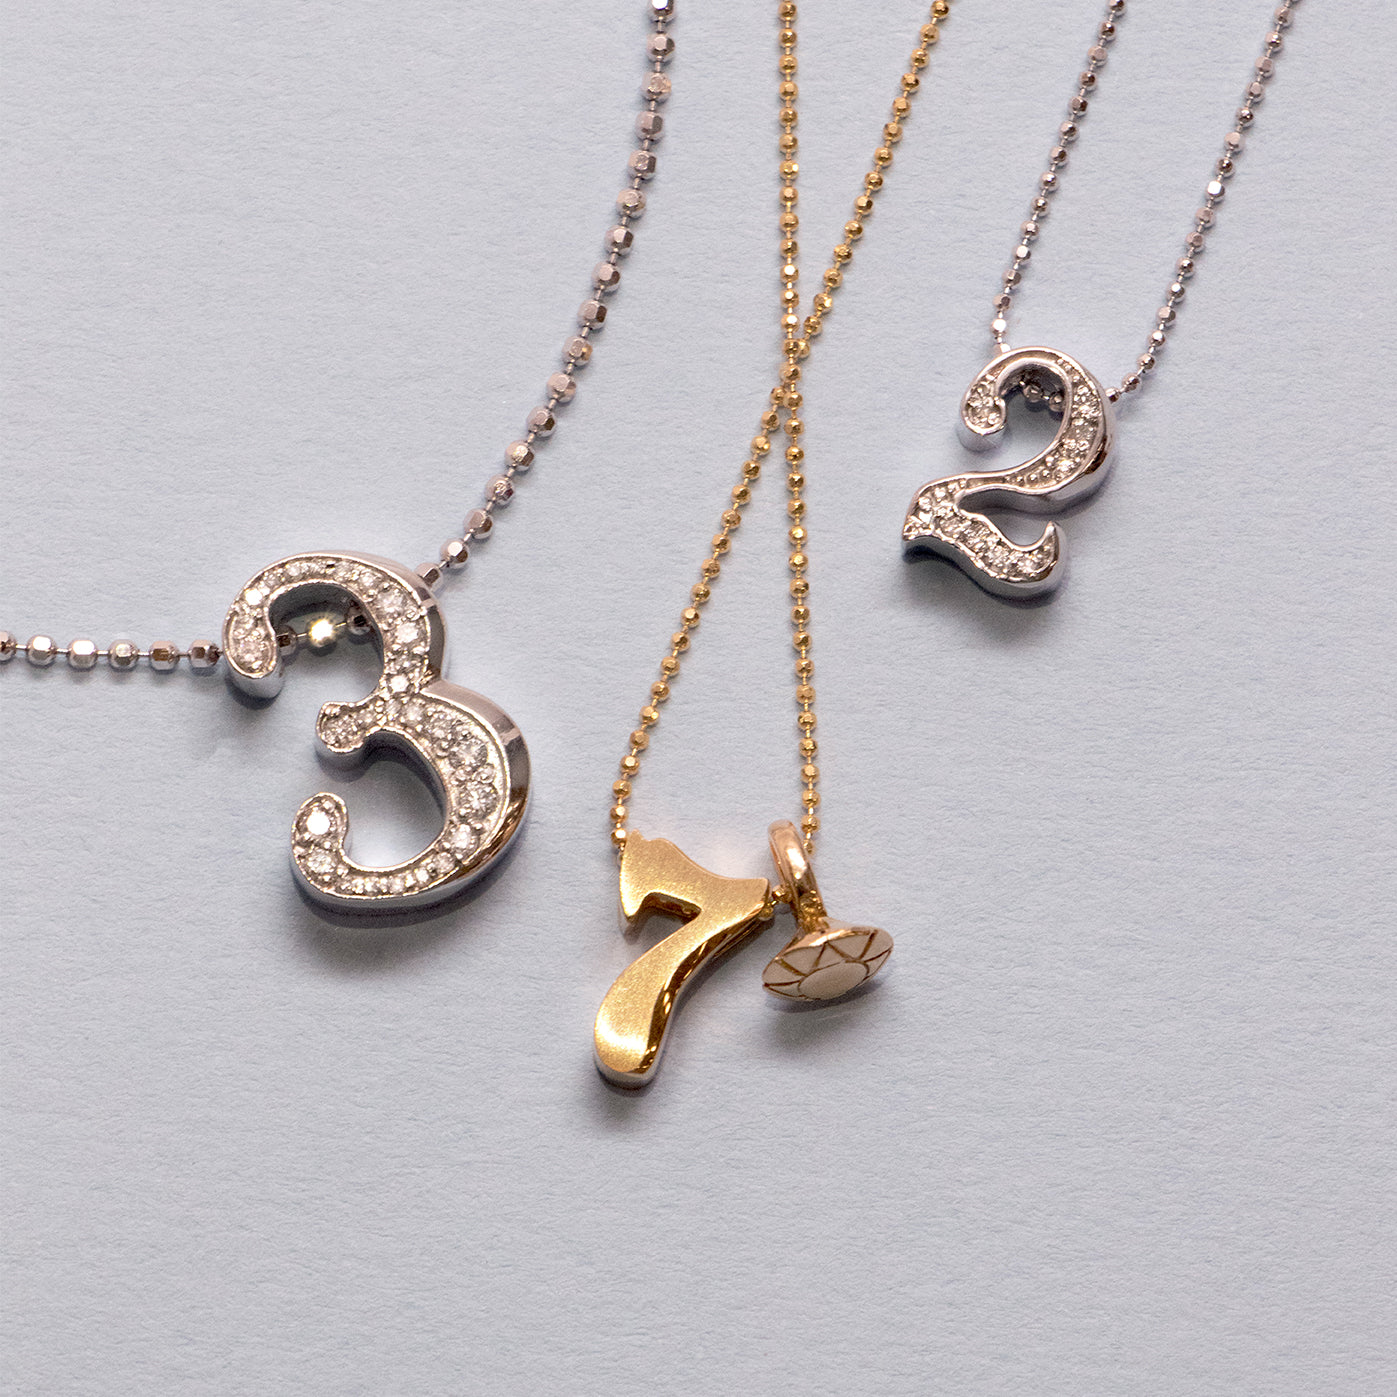 Alex Woo Numbers (0-9) Charm Necklace